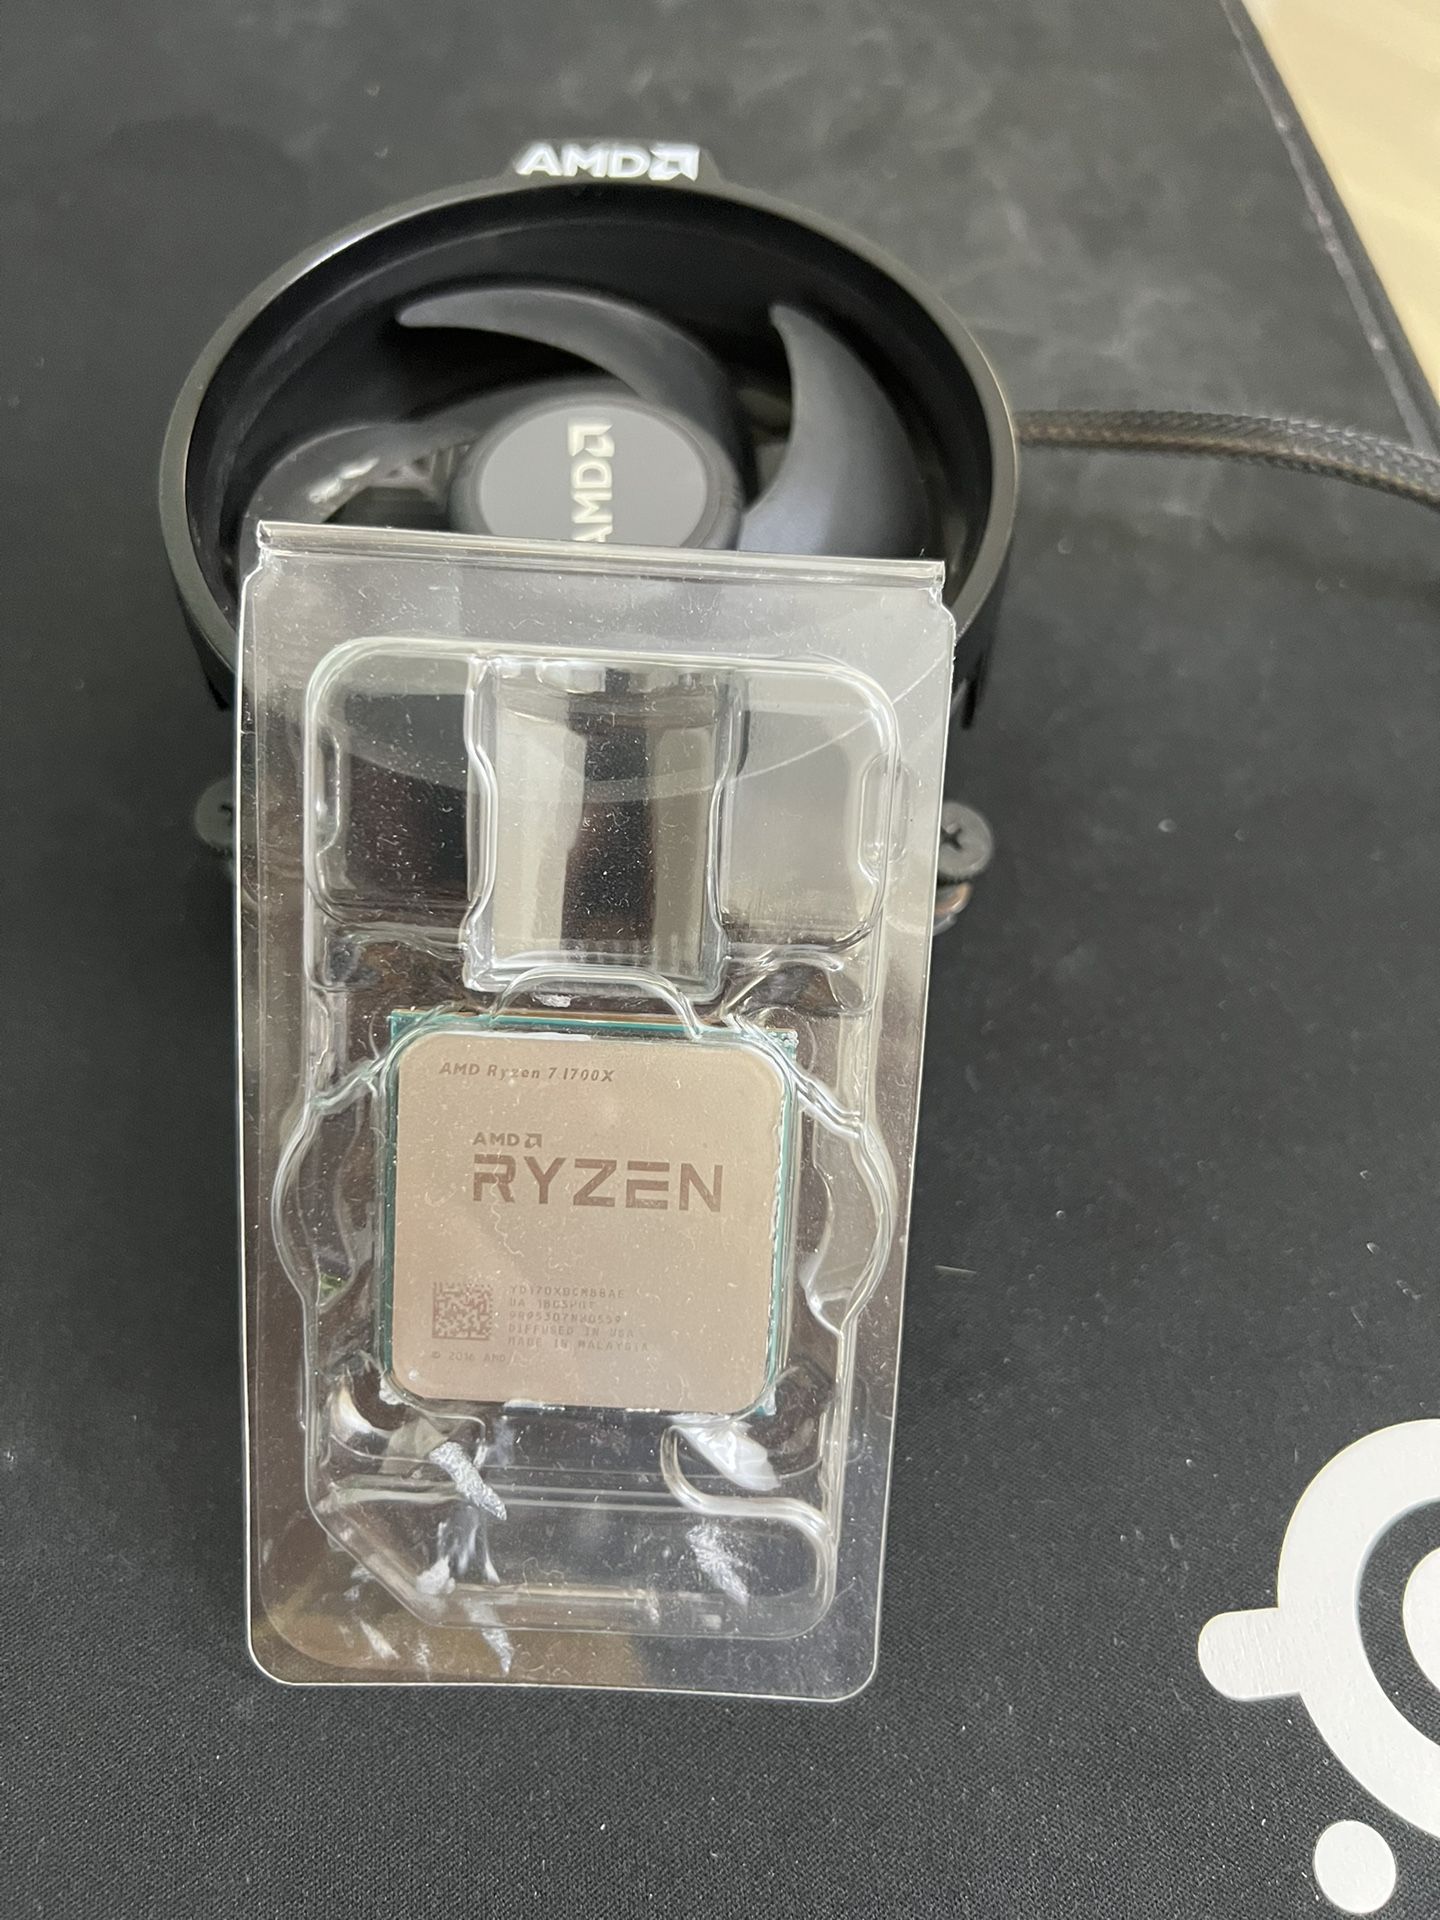 Amd Ryzen 7 1700x 8 Core CPU with Wraith Stealth Cooler